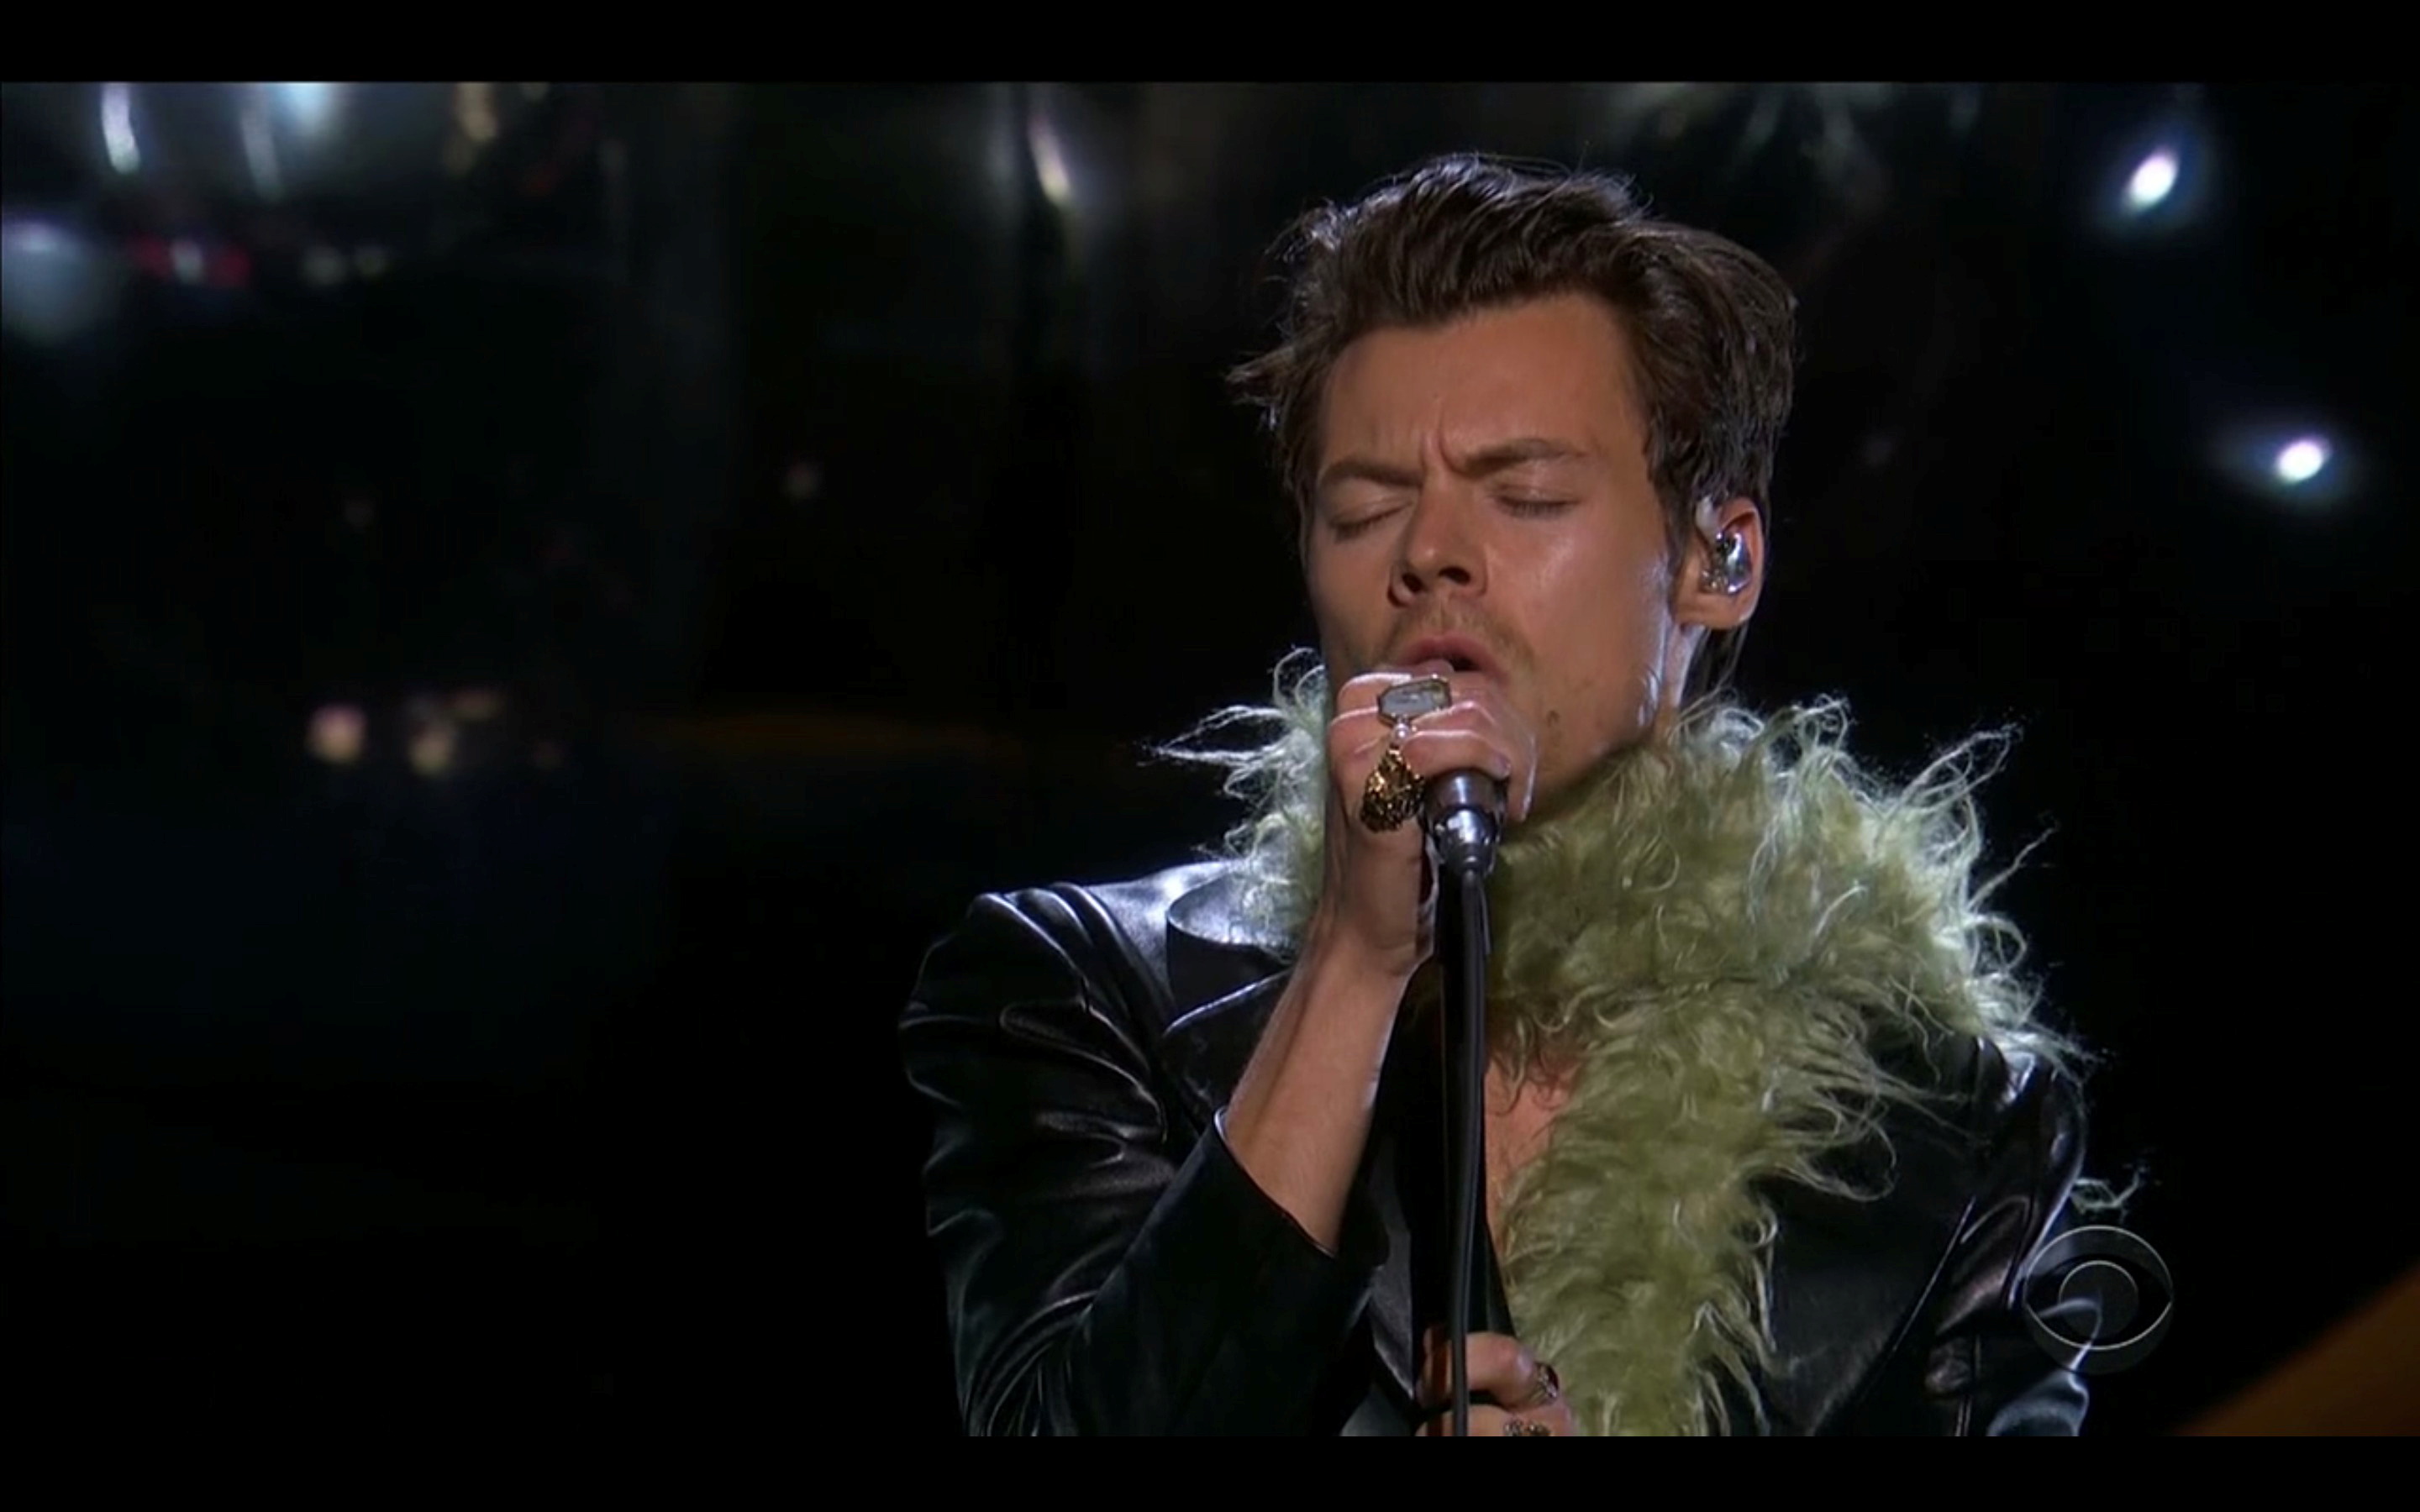 Harry Styles performs in this screen grab taken from video of the 63rd Annual Grammy Awards in Los Angeles, California, U.S., March 14, 2021. CBS/Handout via REUTERS - ATTENTION EDITORS - THIS IMAGE HAS BEEN SUPPLIED BY A THIRD PARTY. NO ARCHIVES, NO SALES, MANDATORY CREDIT, NO NEW USES AFTER 0400 GMT 17/3/2021, NO BROADCAST USE, USE FOR GRAMMY RELATED COVERAGE ONLY